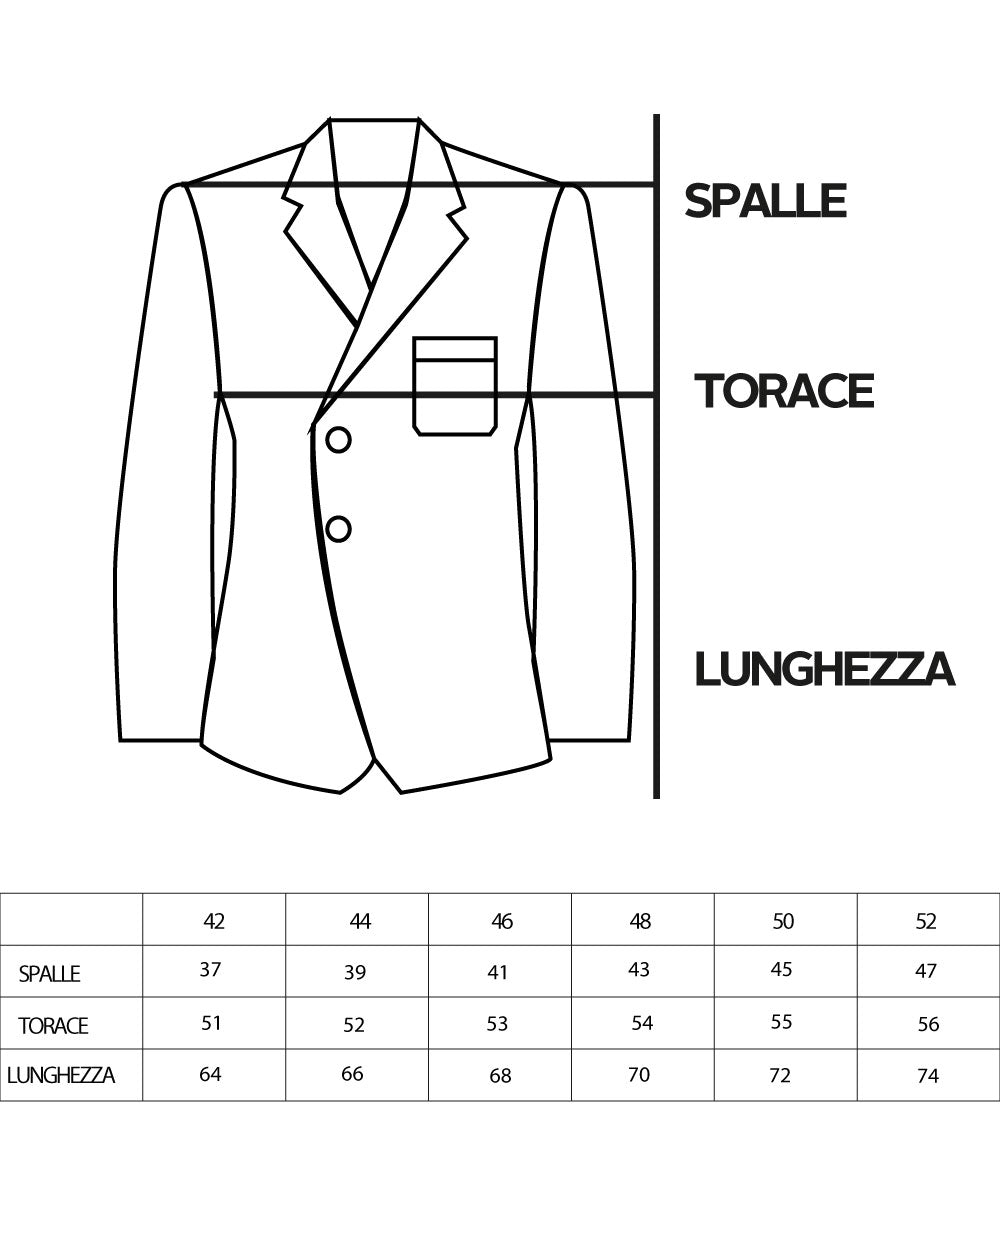 Single Breasted Men's Suit Viscose Suit Elegant Gray Ceremony Jacket Trousers GIOSAL-OU2275A